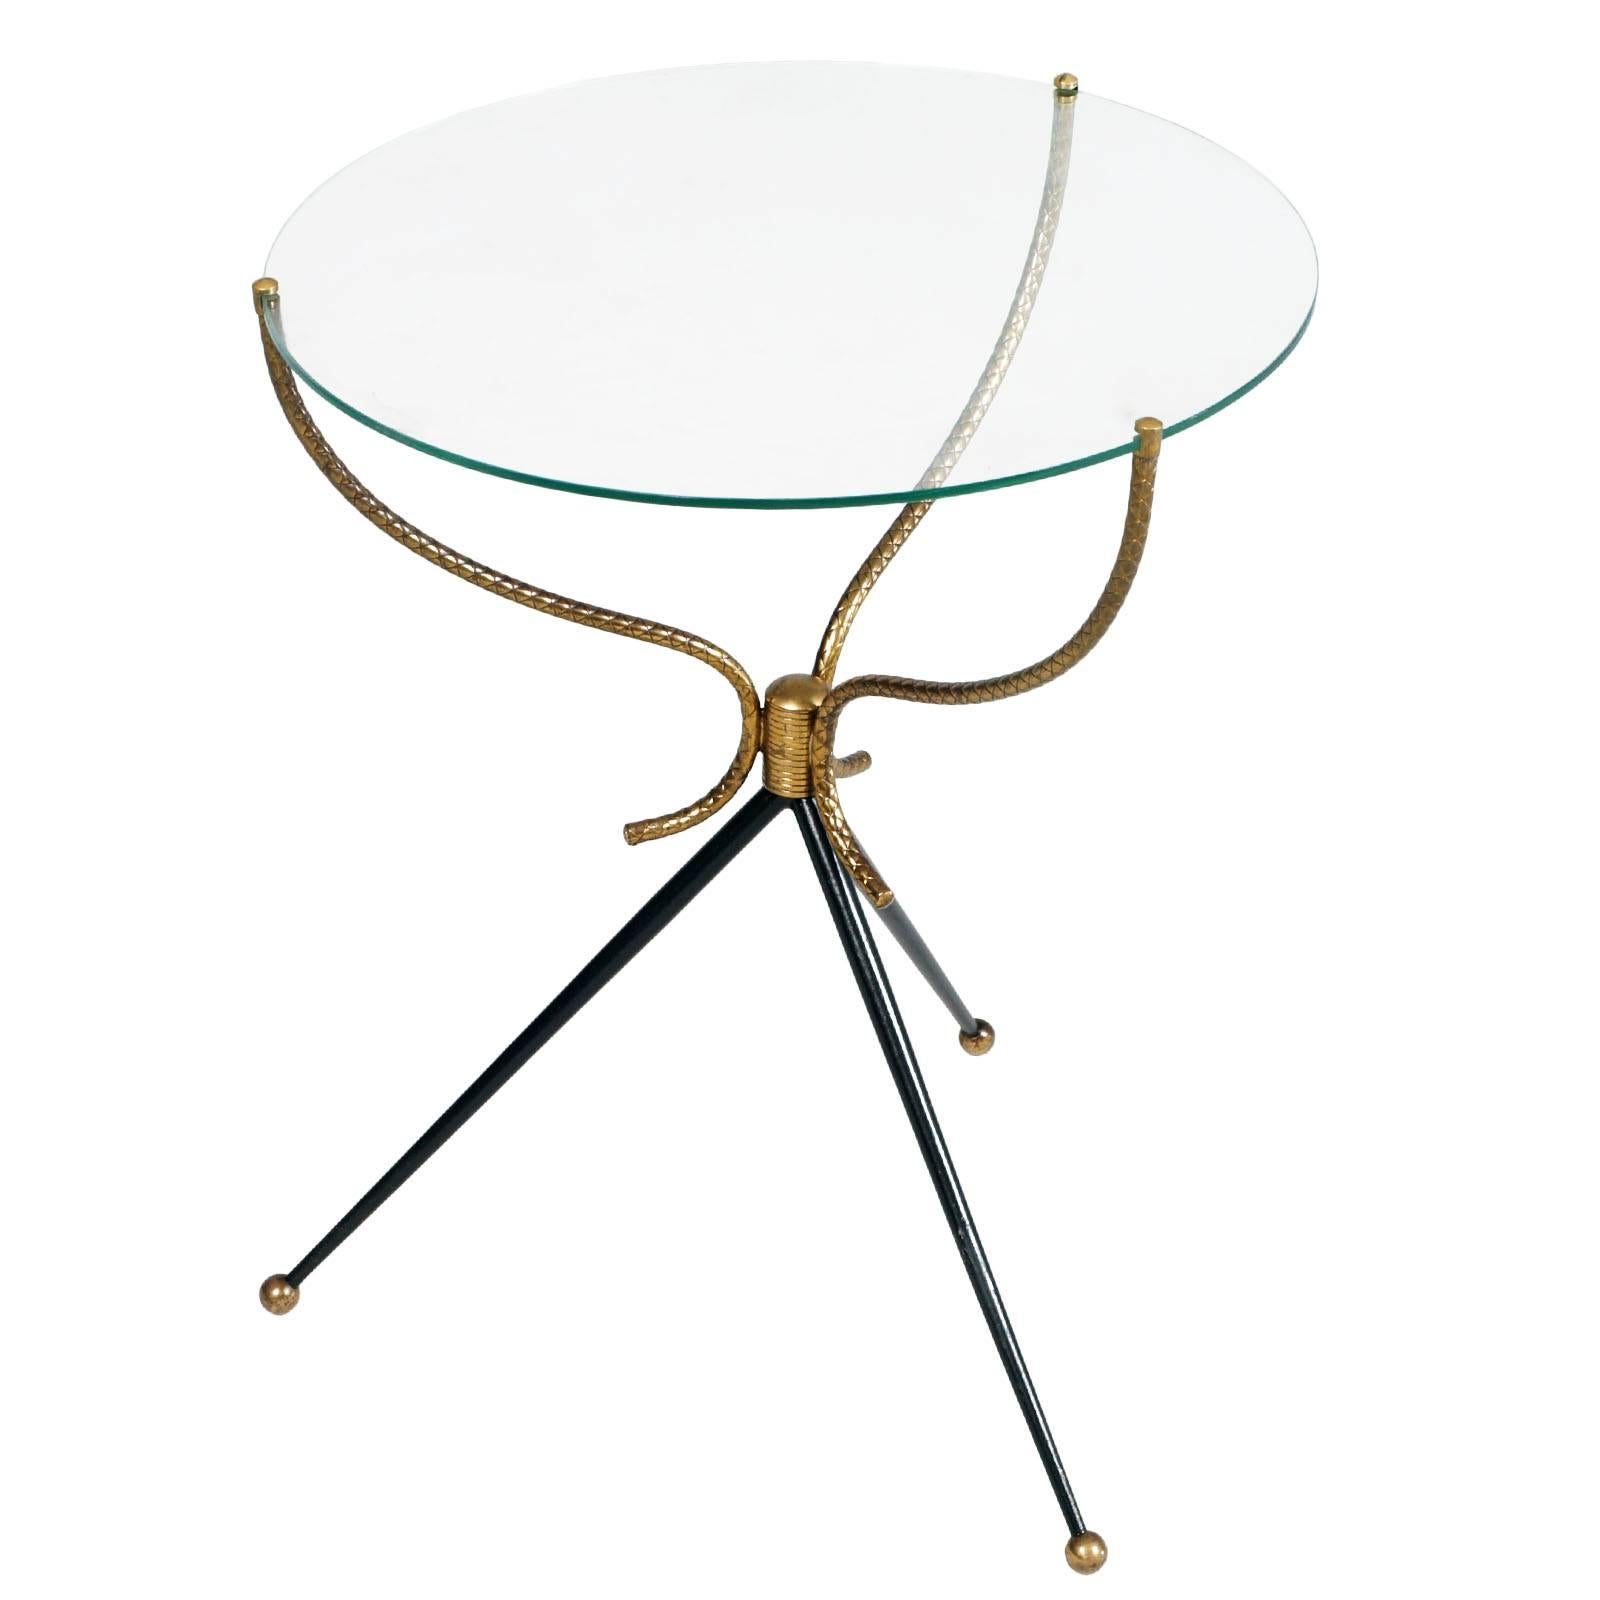 1930s Gio Ponti Style Tripod Coffee Table, Gilt and Lacquered Brass, Cristal Top